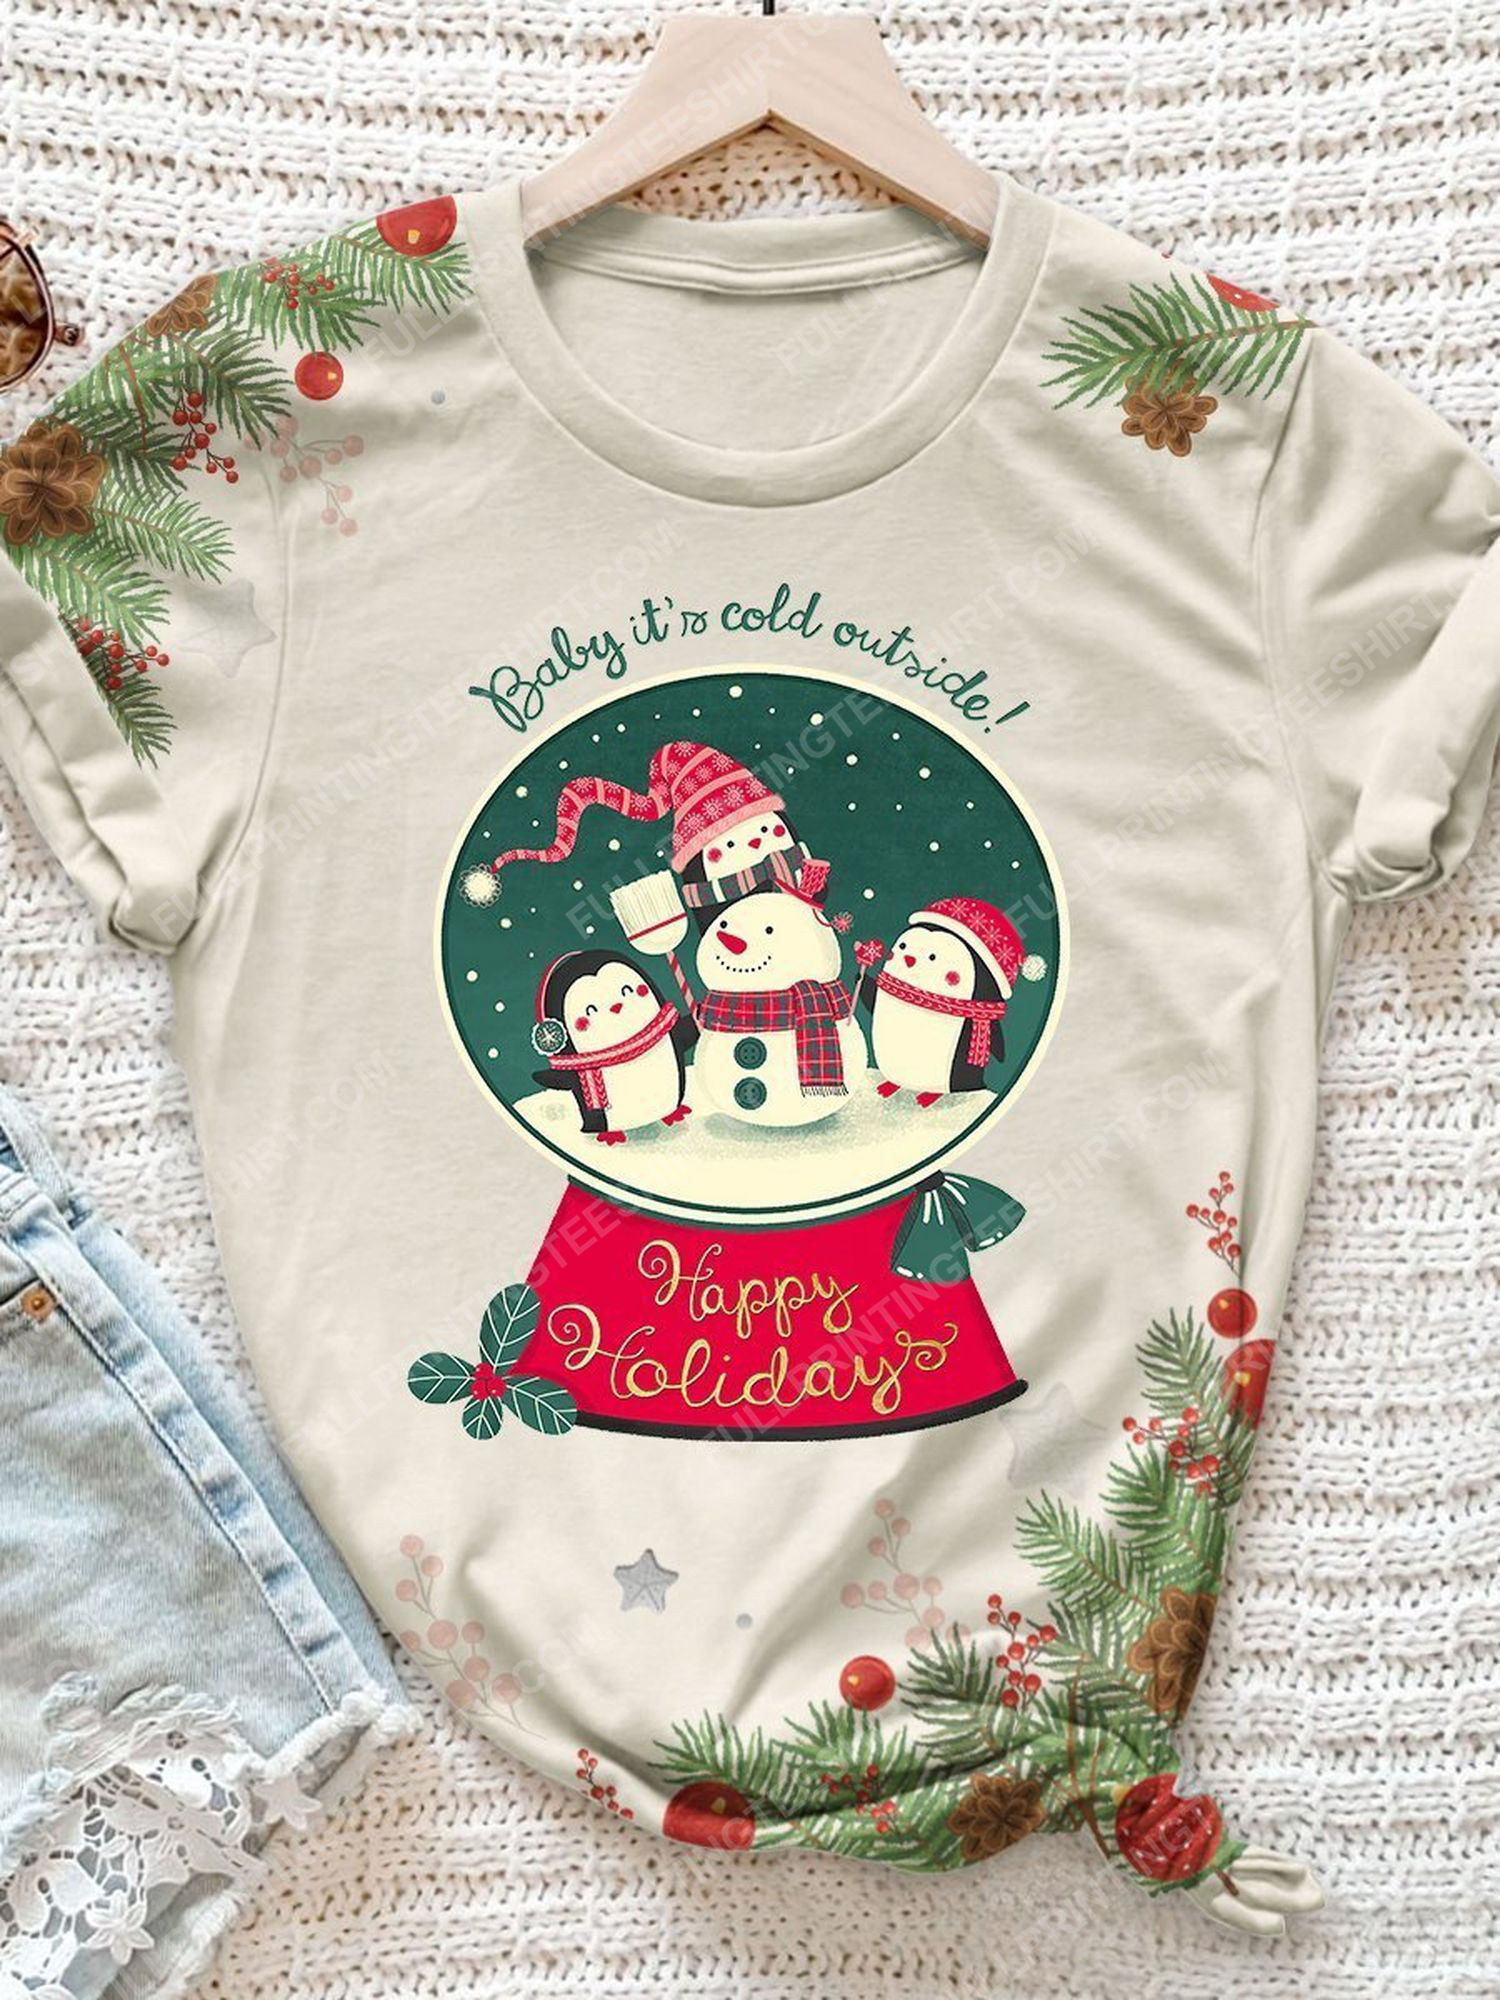 Happy holiday baby it's cold outside full print shirt